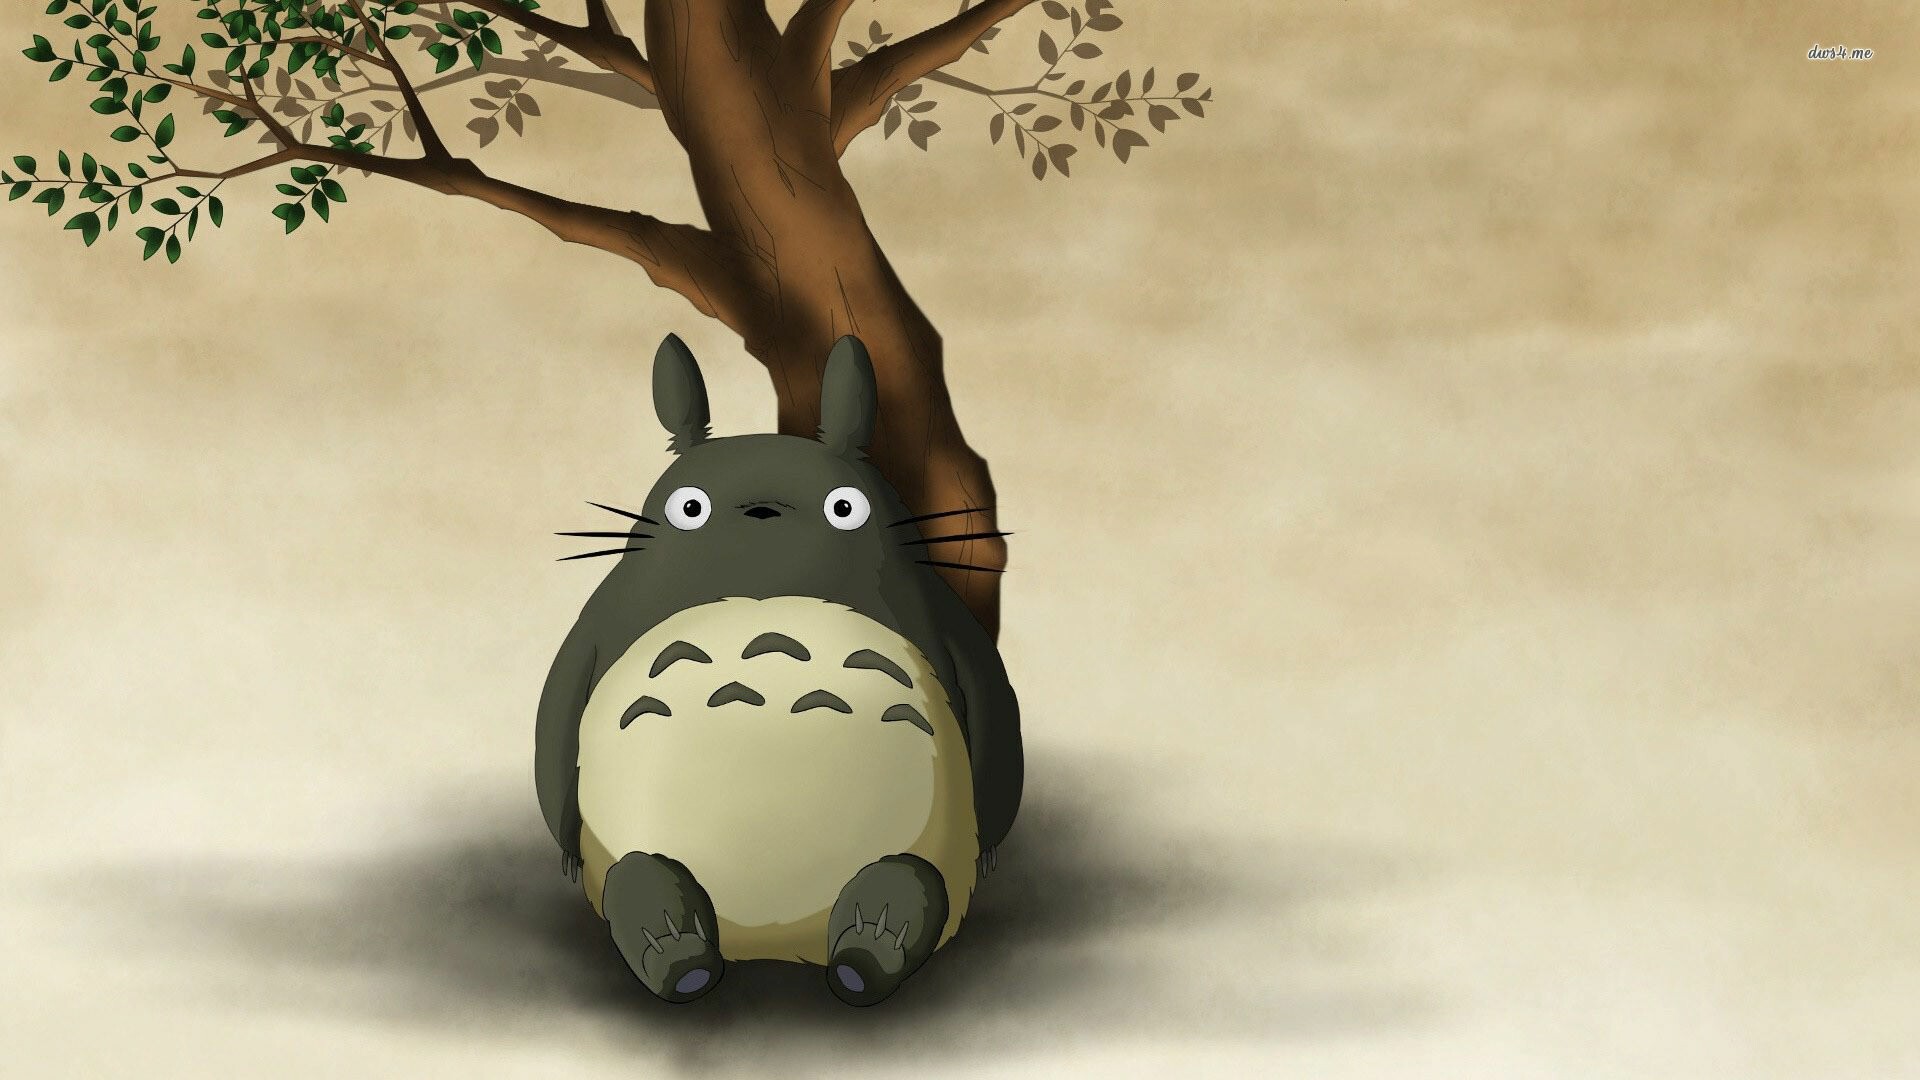 My Neighbor Totoro: An animated film written and directed by Hayao Miyazaki, A spirit of the forest. 1920x1080 Full HD Background.